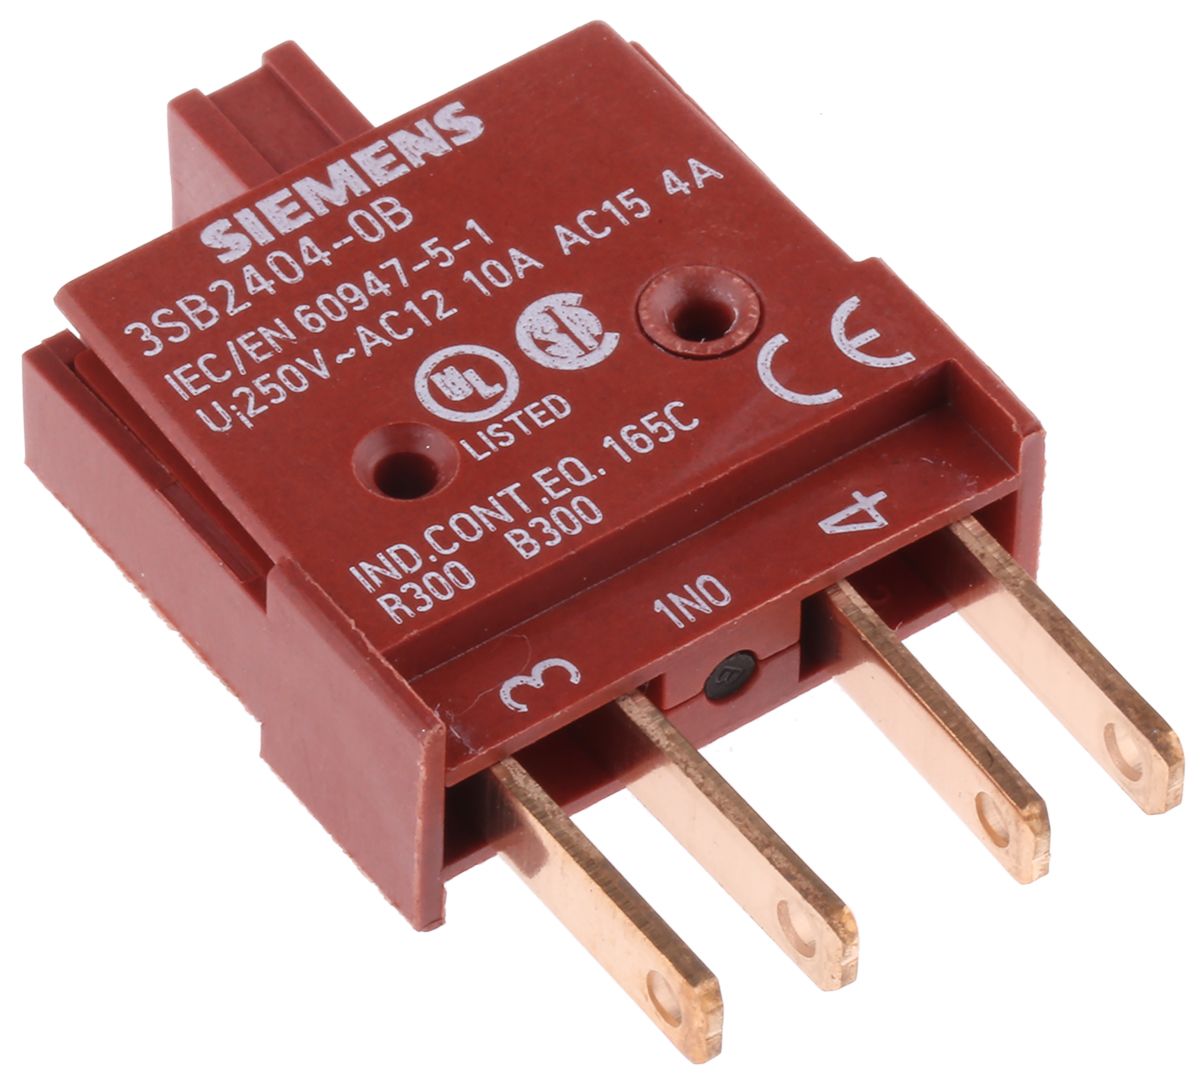 Siemens Contact Block for Use with 3SB2, 1 NO